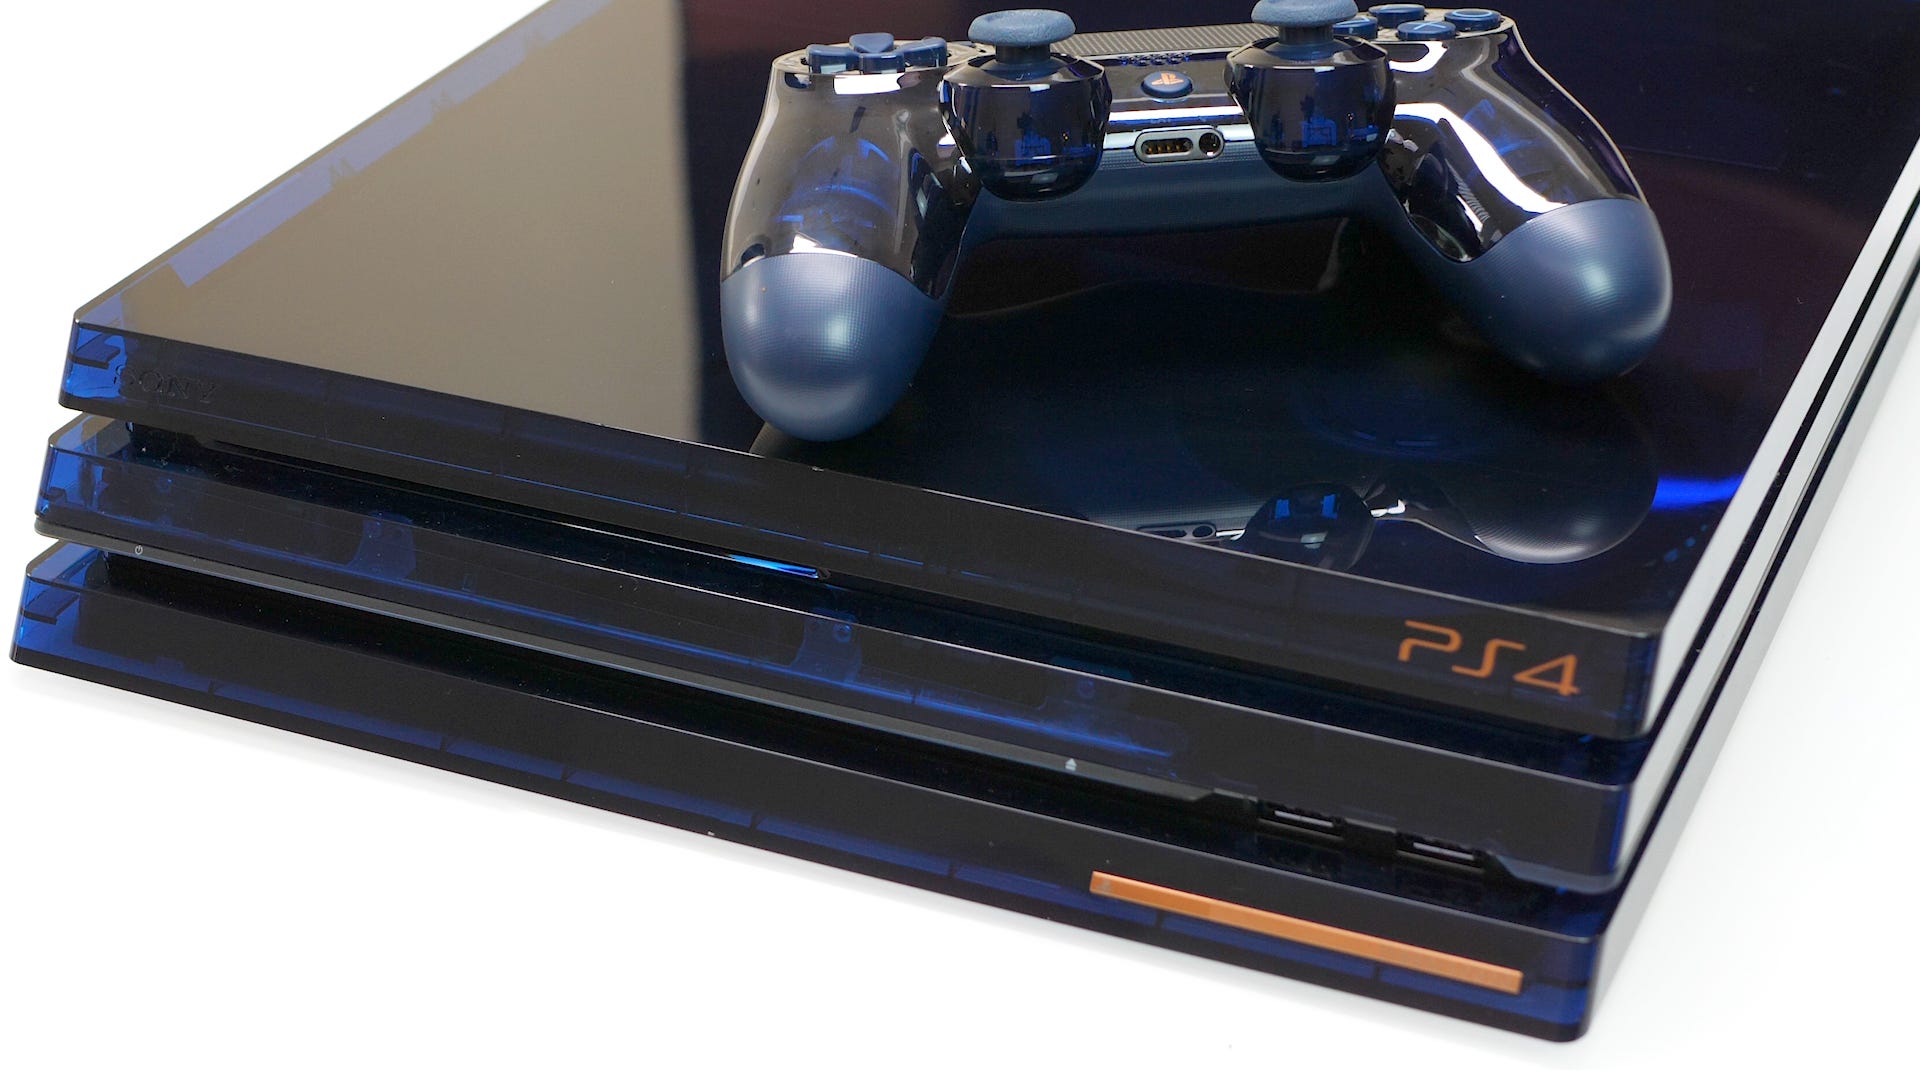 Hands-on with the deluxe PS4 Pro 500 Million Limited Edition